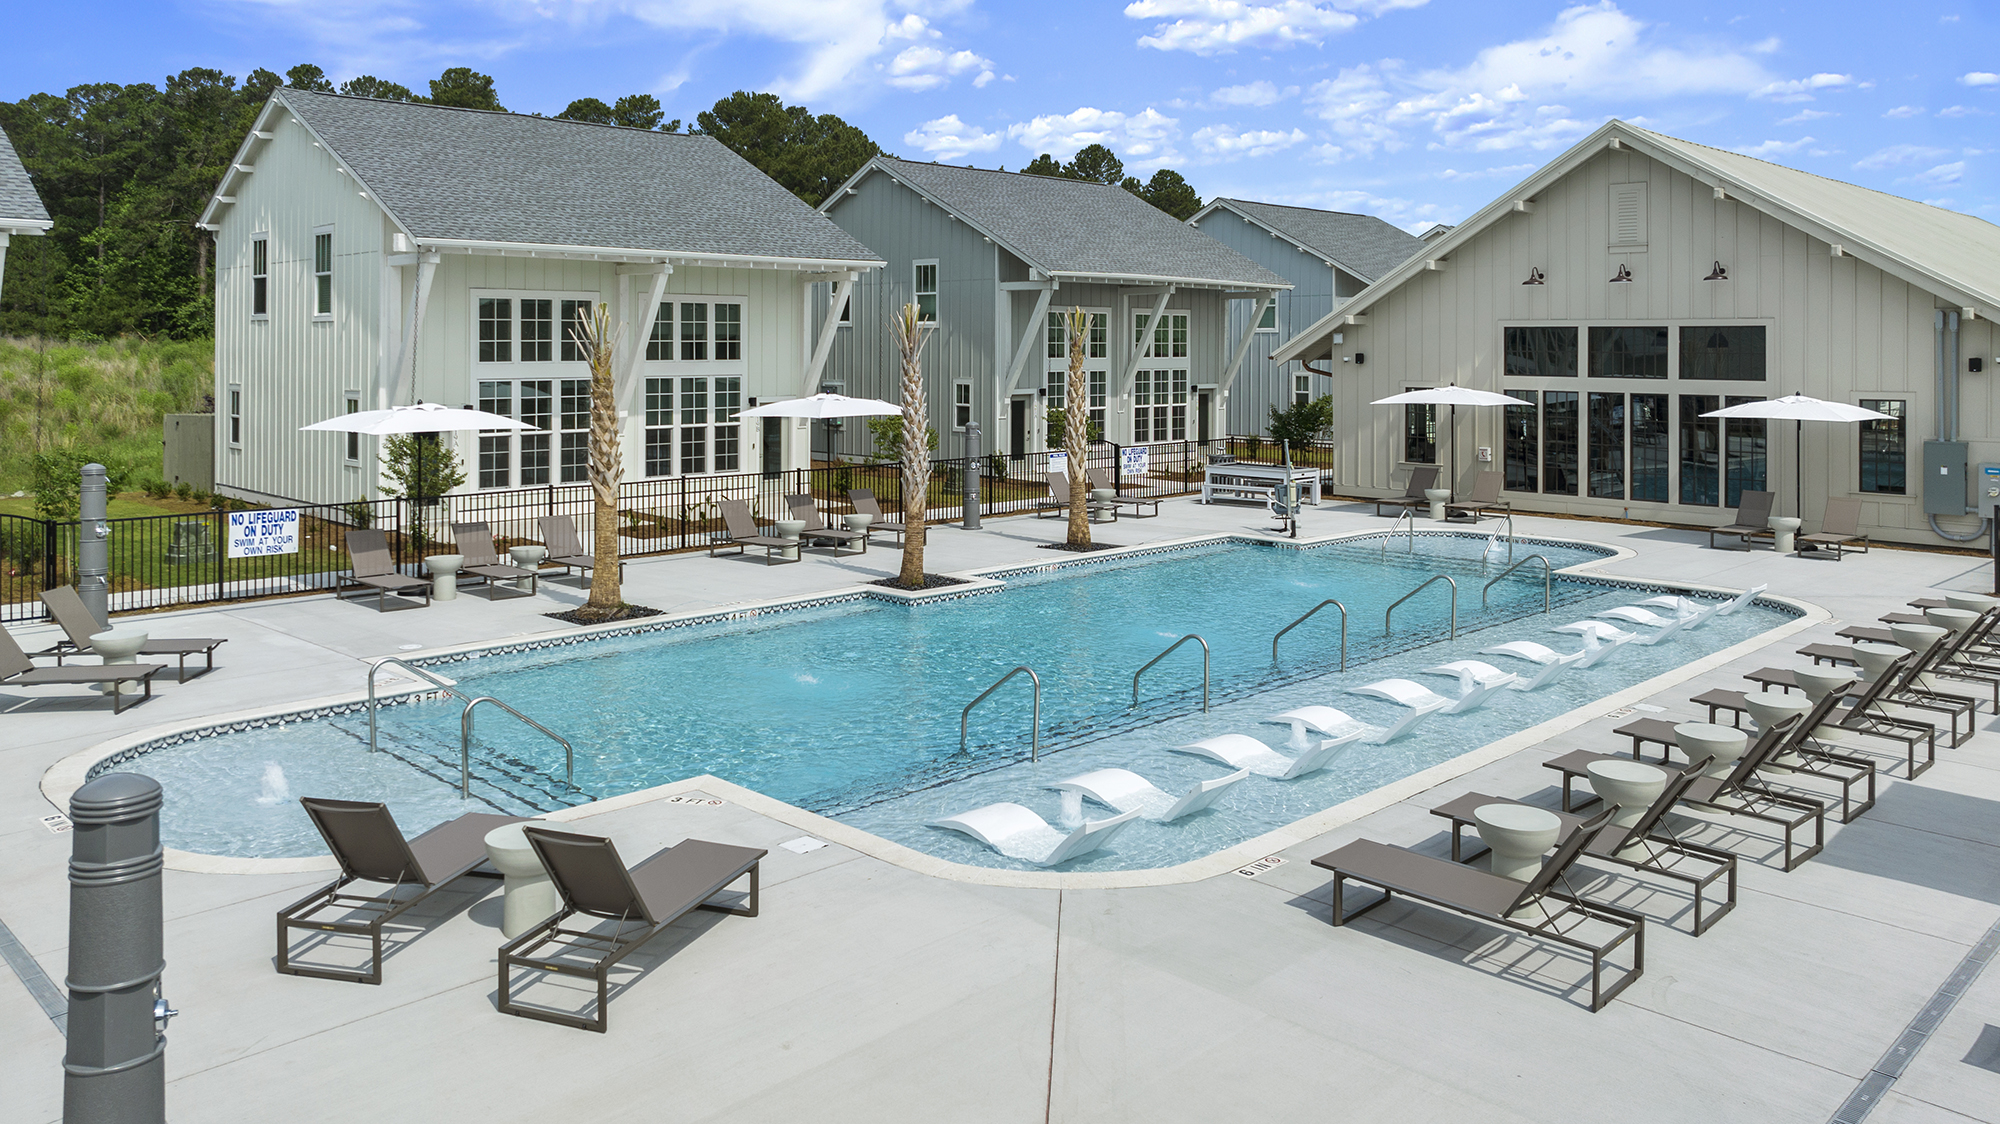 New Built-to-Rent Homes are Becoming Increasingly Popular in Myrtle Beach